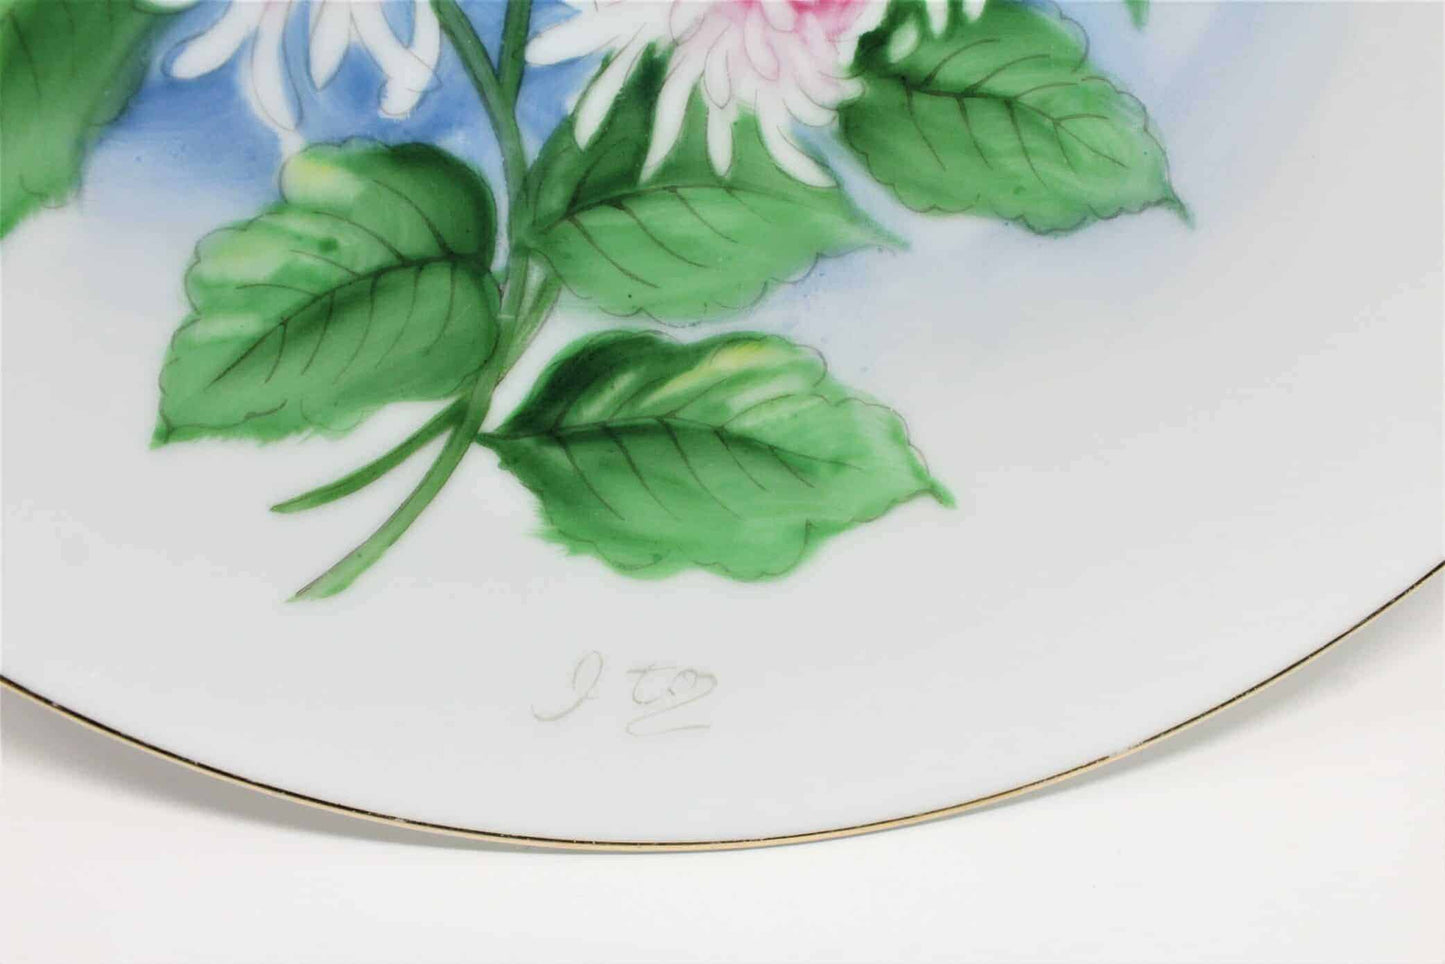 Decorative Plate, Hand Painted Signed, Spider Mums, Vintage Japan